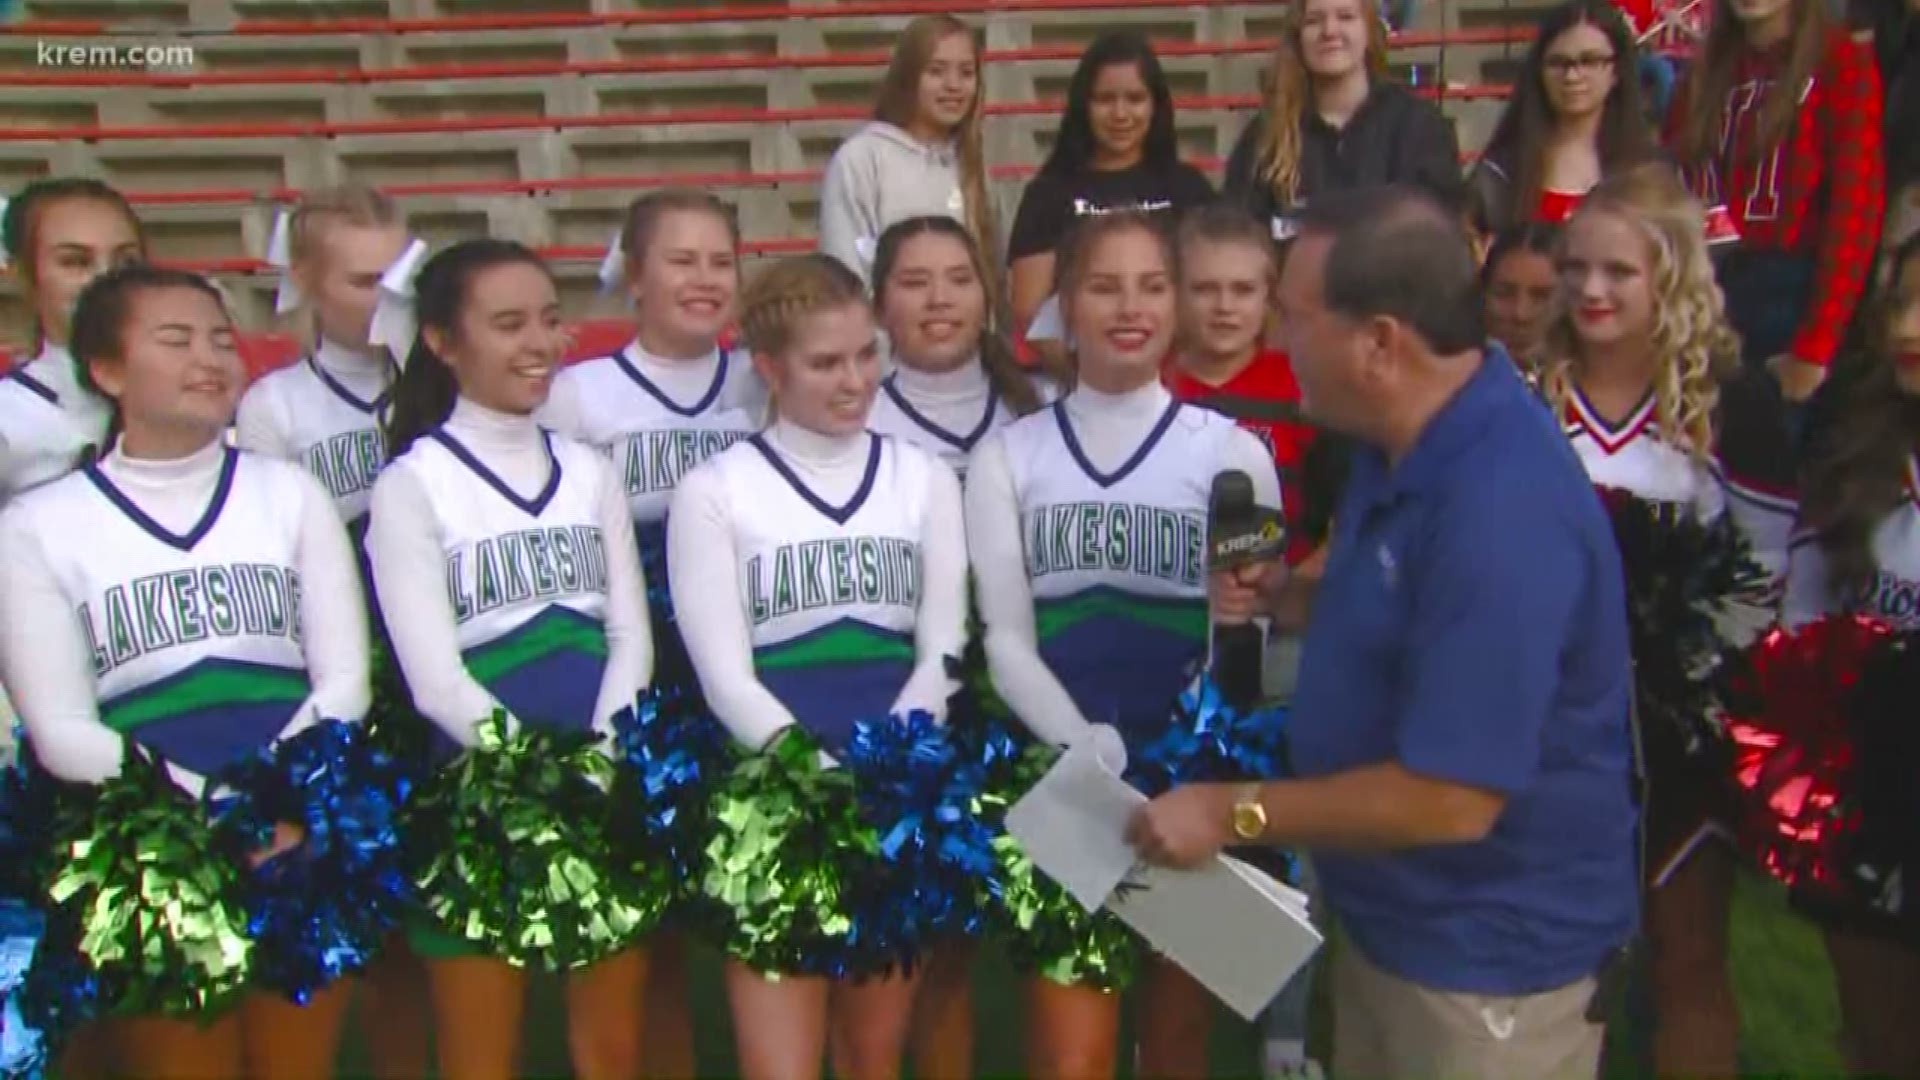 Each week, KREM 2 News selects two local football games. Students, parents and football fans are asked to vote for which football game Chief Meteorologist Tom Sherry visits on the following Friday!